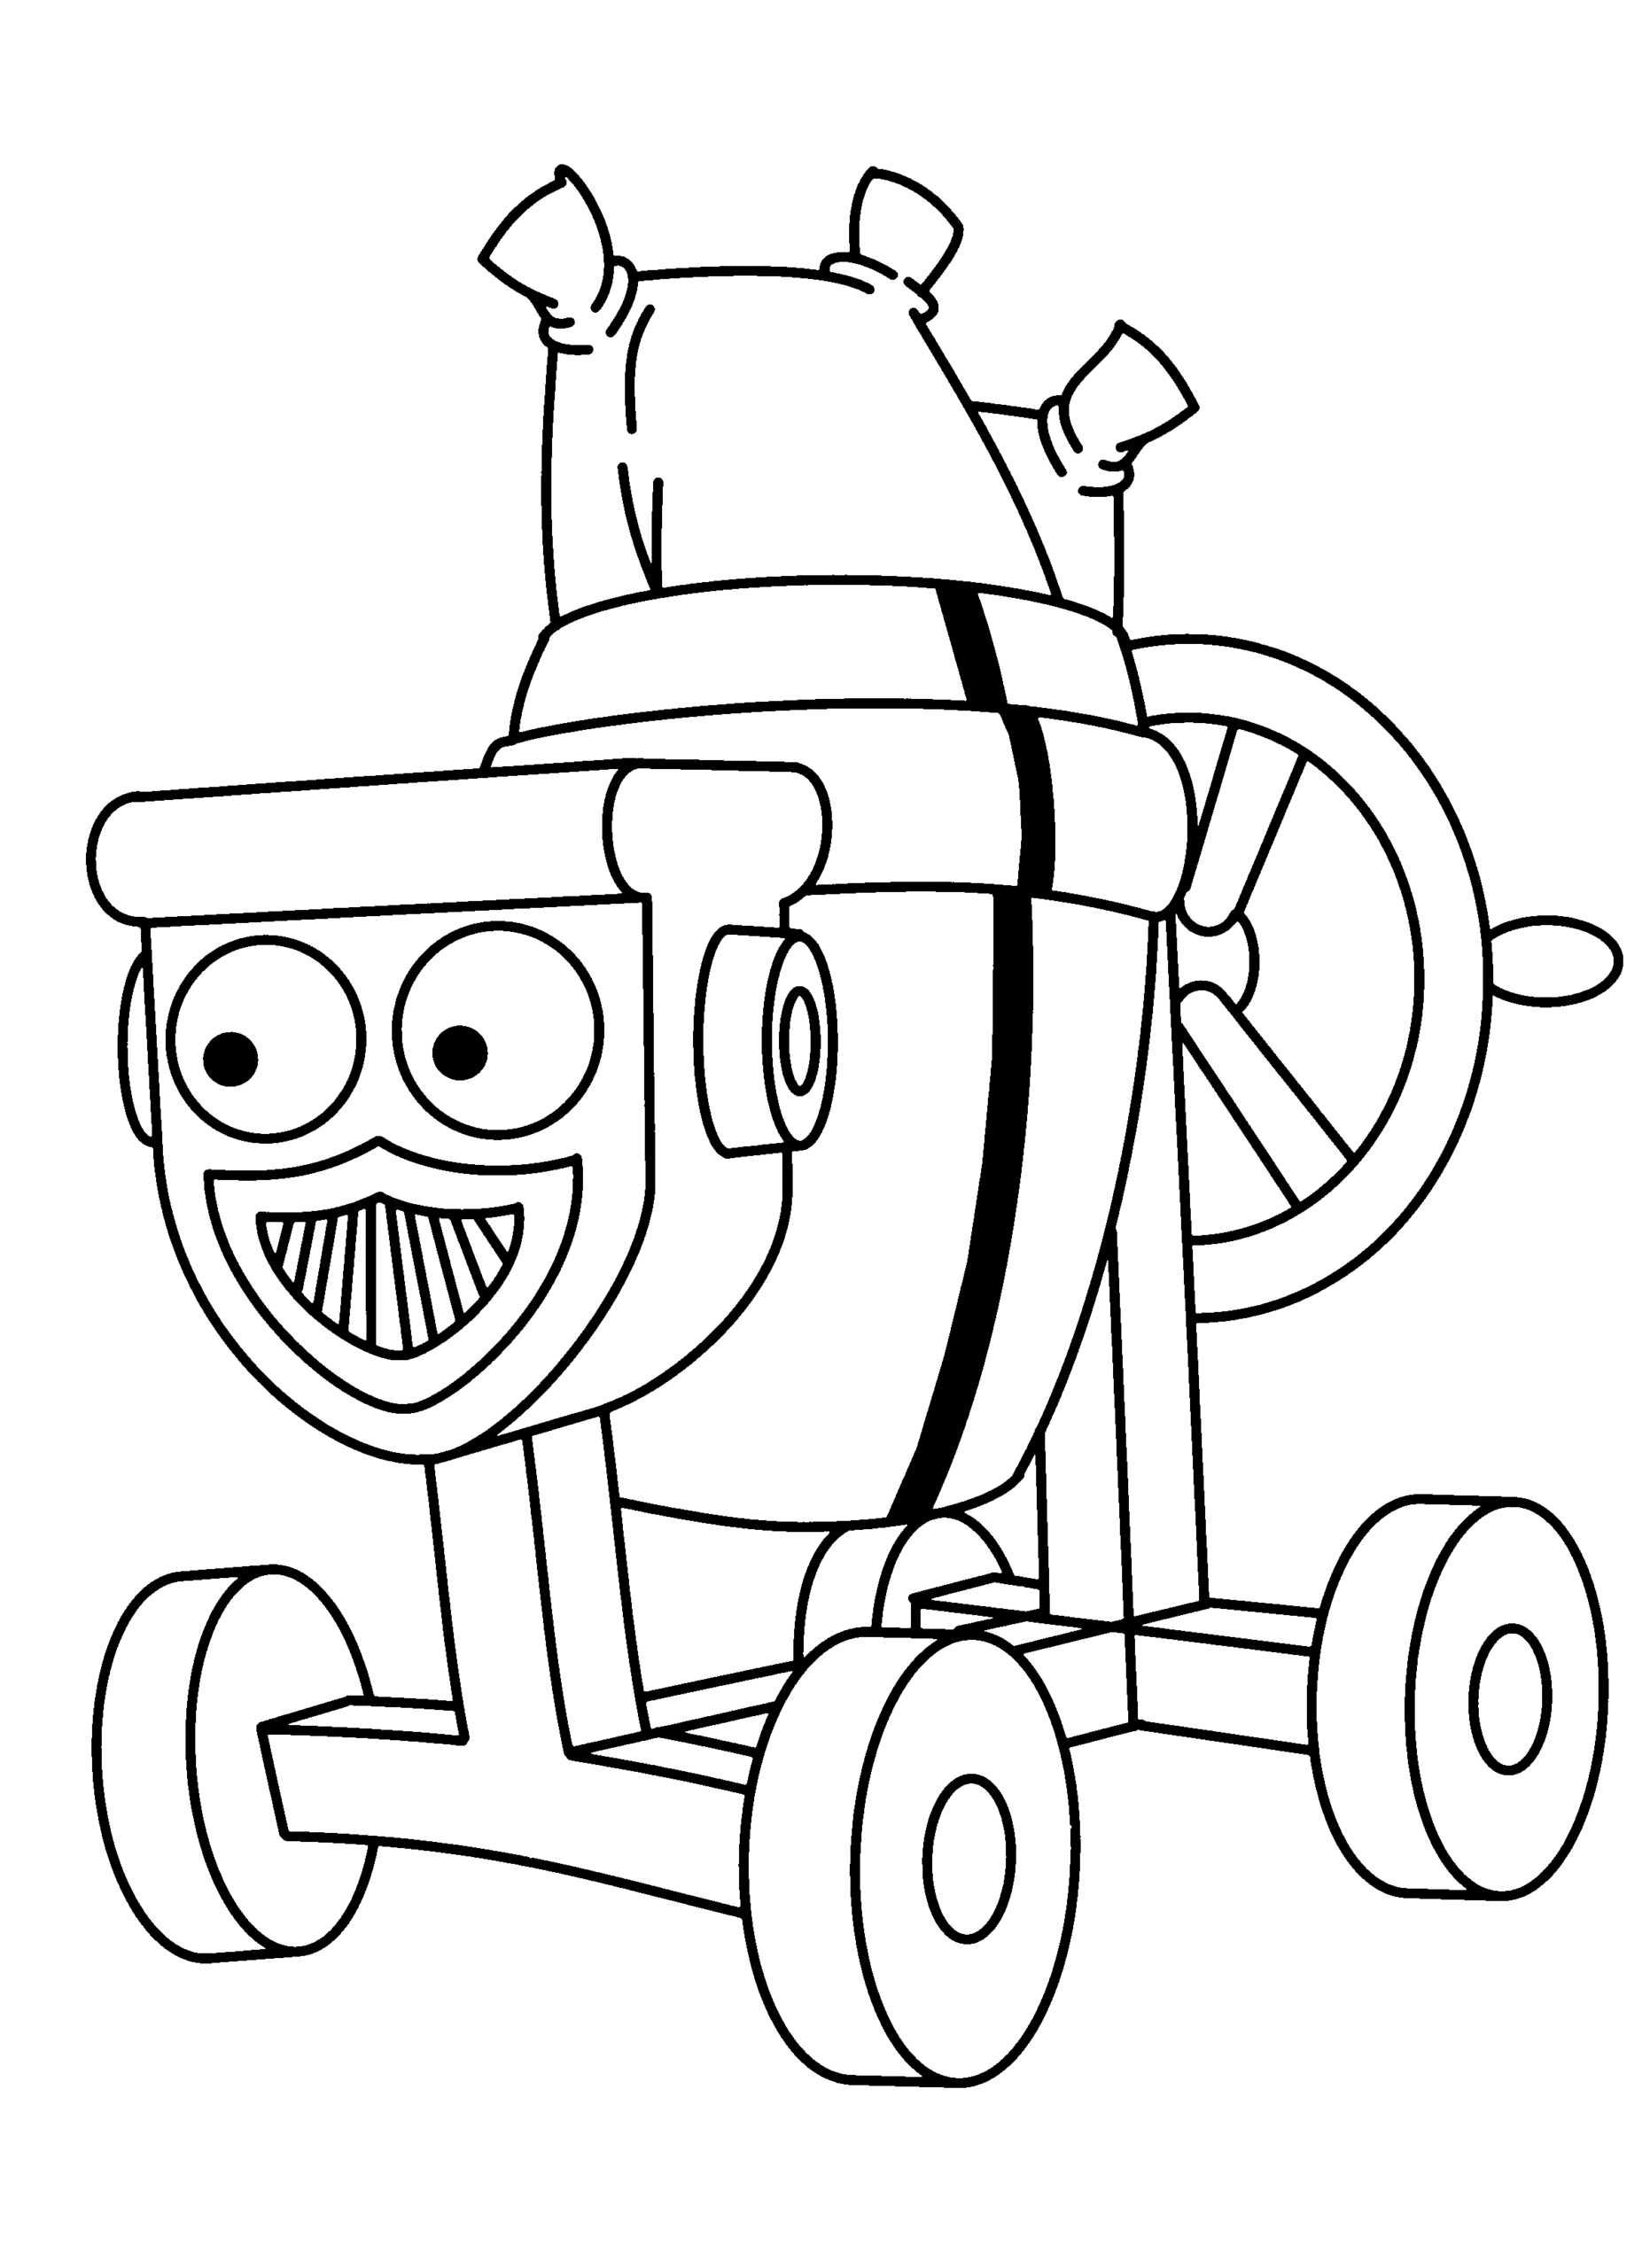 Bob the Builder Coloring Pages TV Film bob the builder 58 Printable 2020 01078 Coloring4free